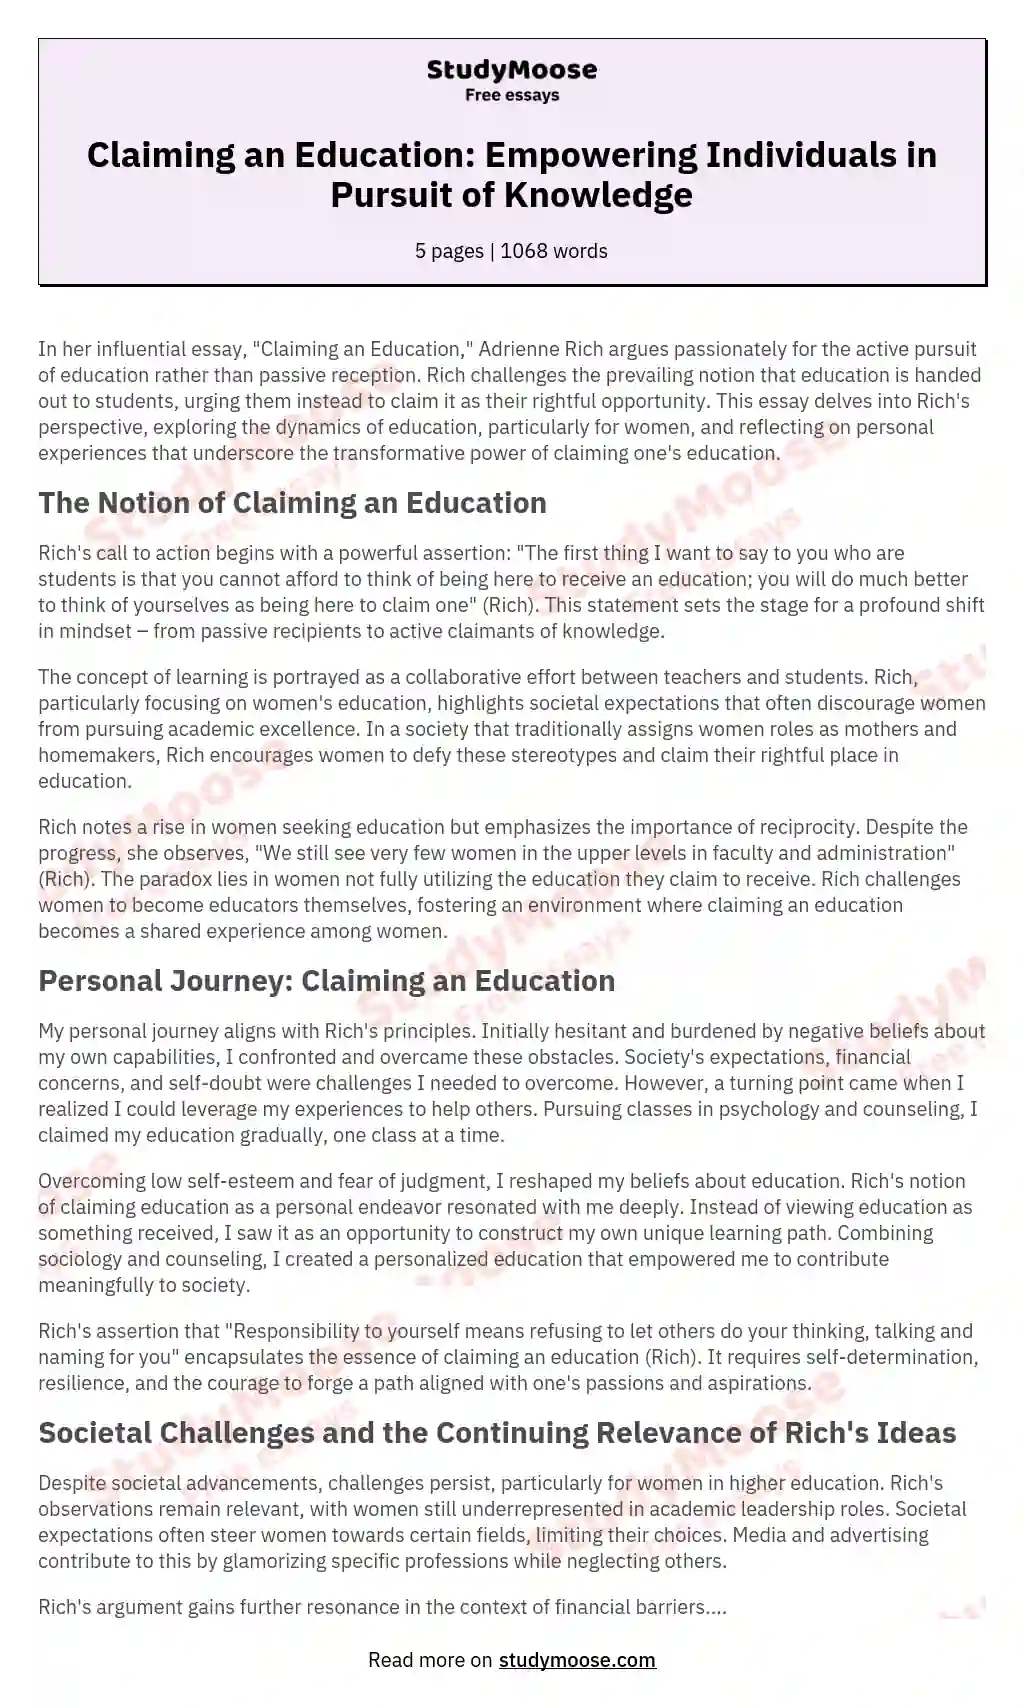 Claiming an Education: Empowering Individuals in Pursuit of Knowledge essay